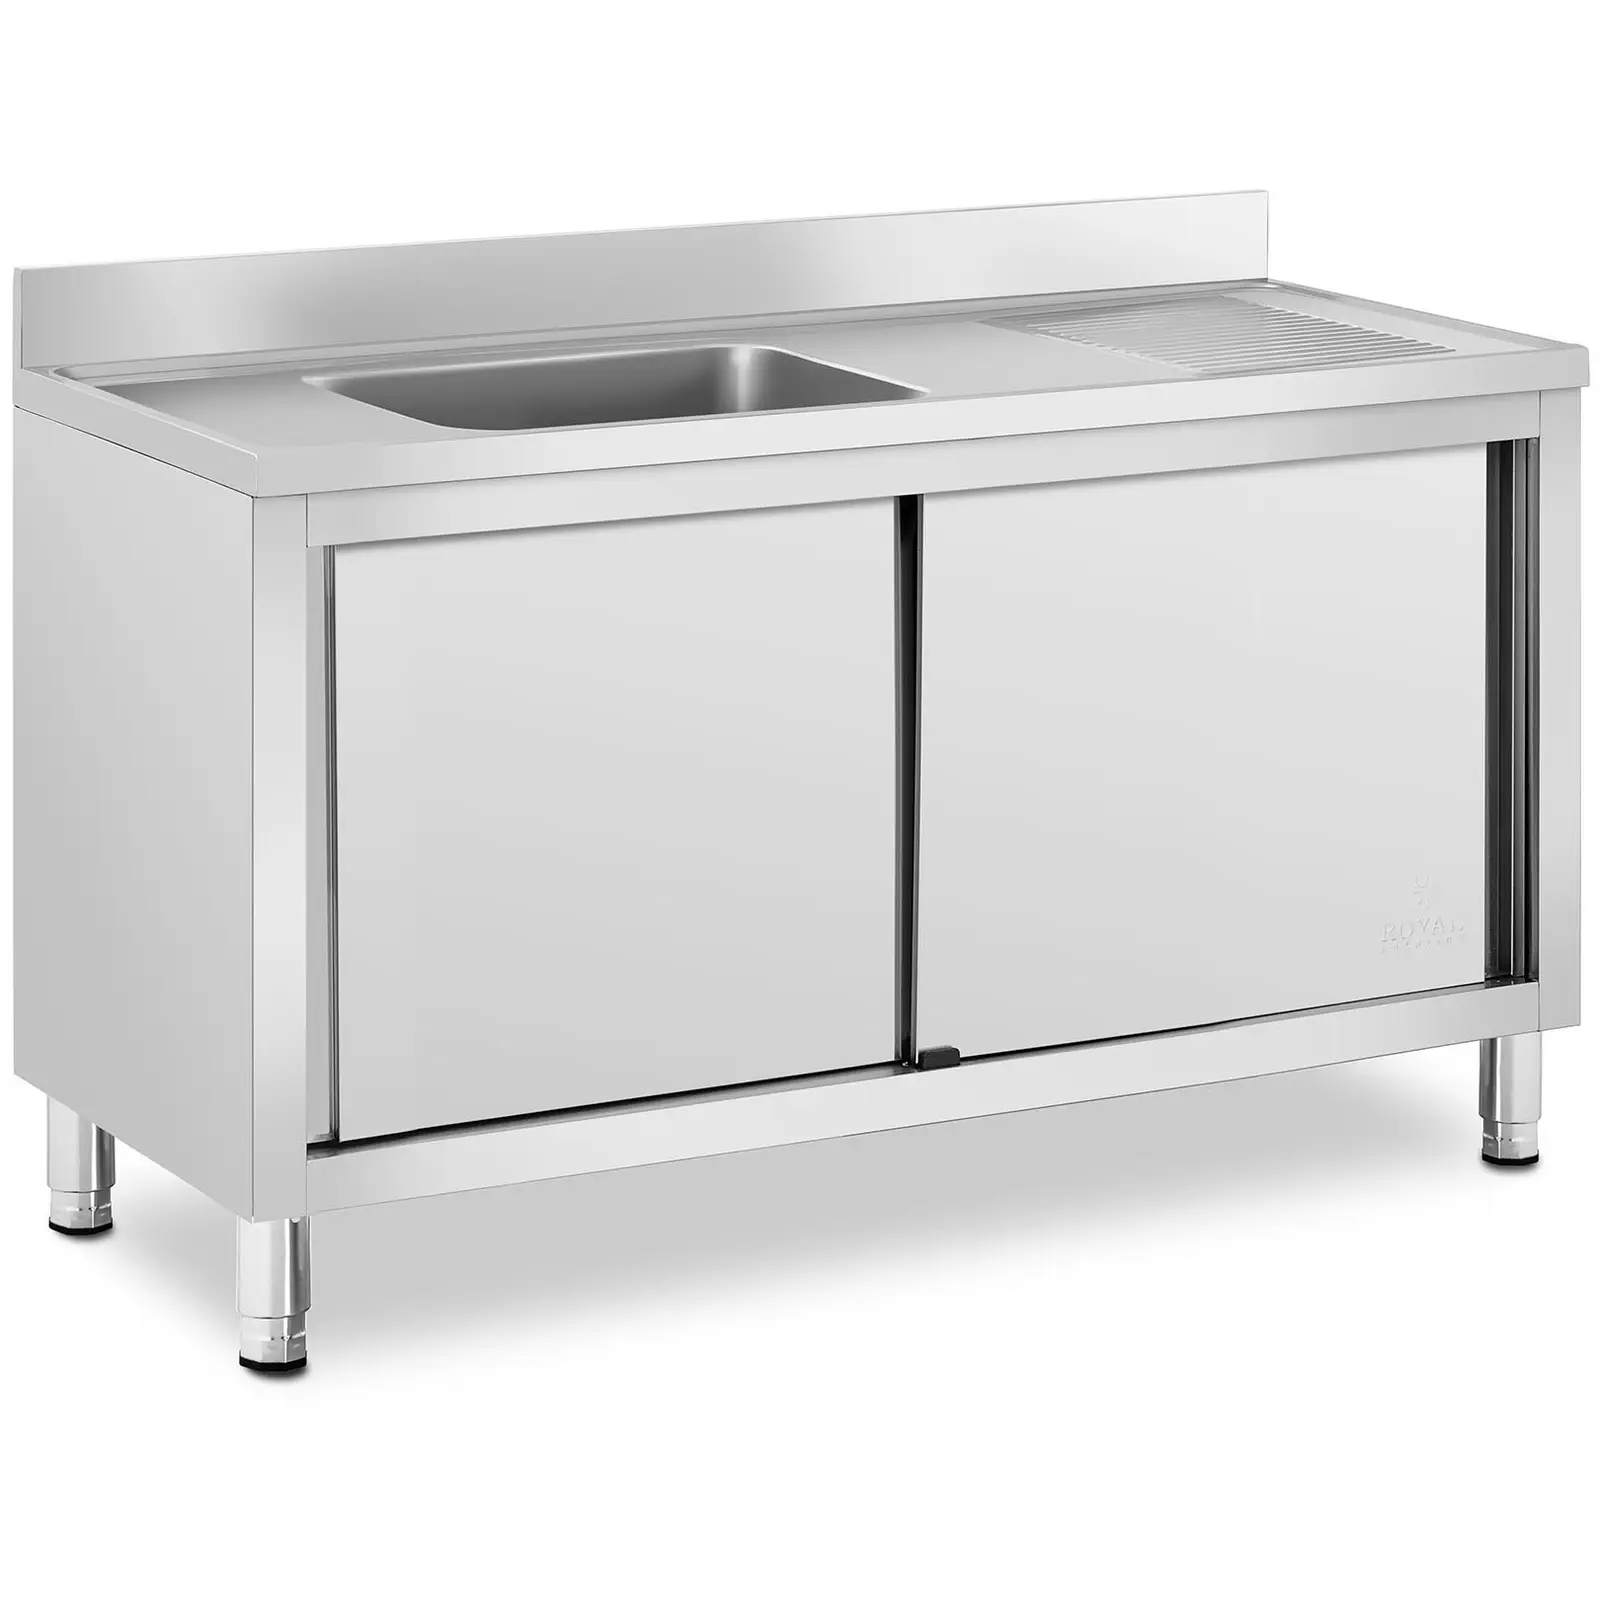 Commercial Kitchen Sink - 1 basin - Royal Catering - Stainless steel - 500 x 400 x 240 mm